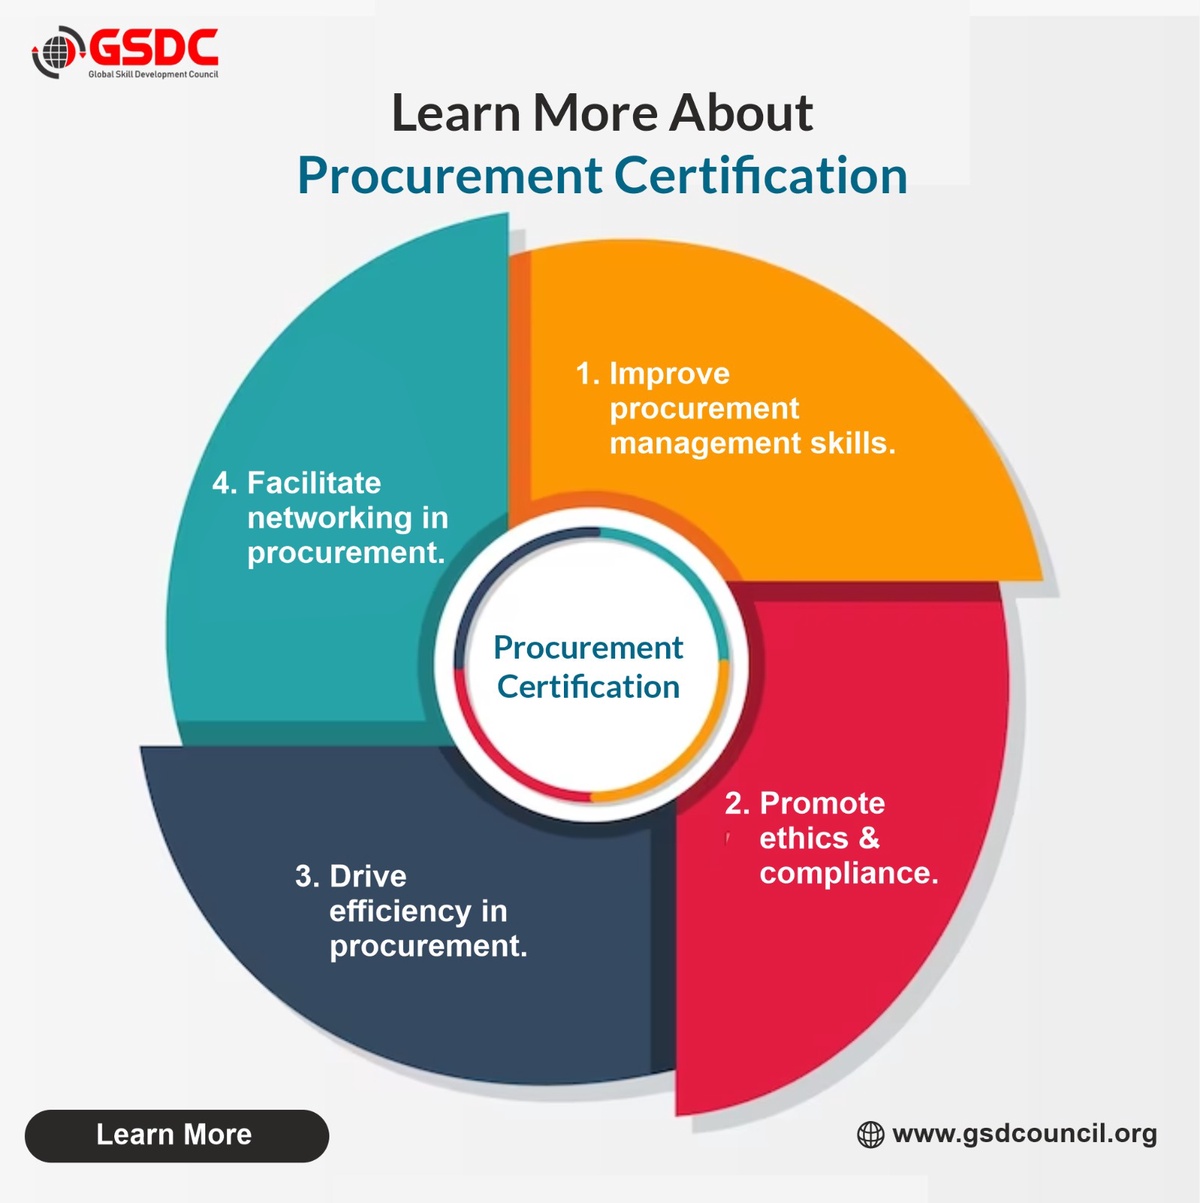 Learn more about Procurement Certification